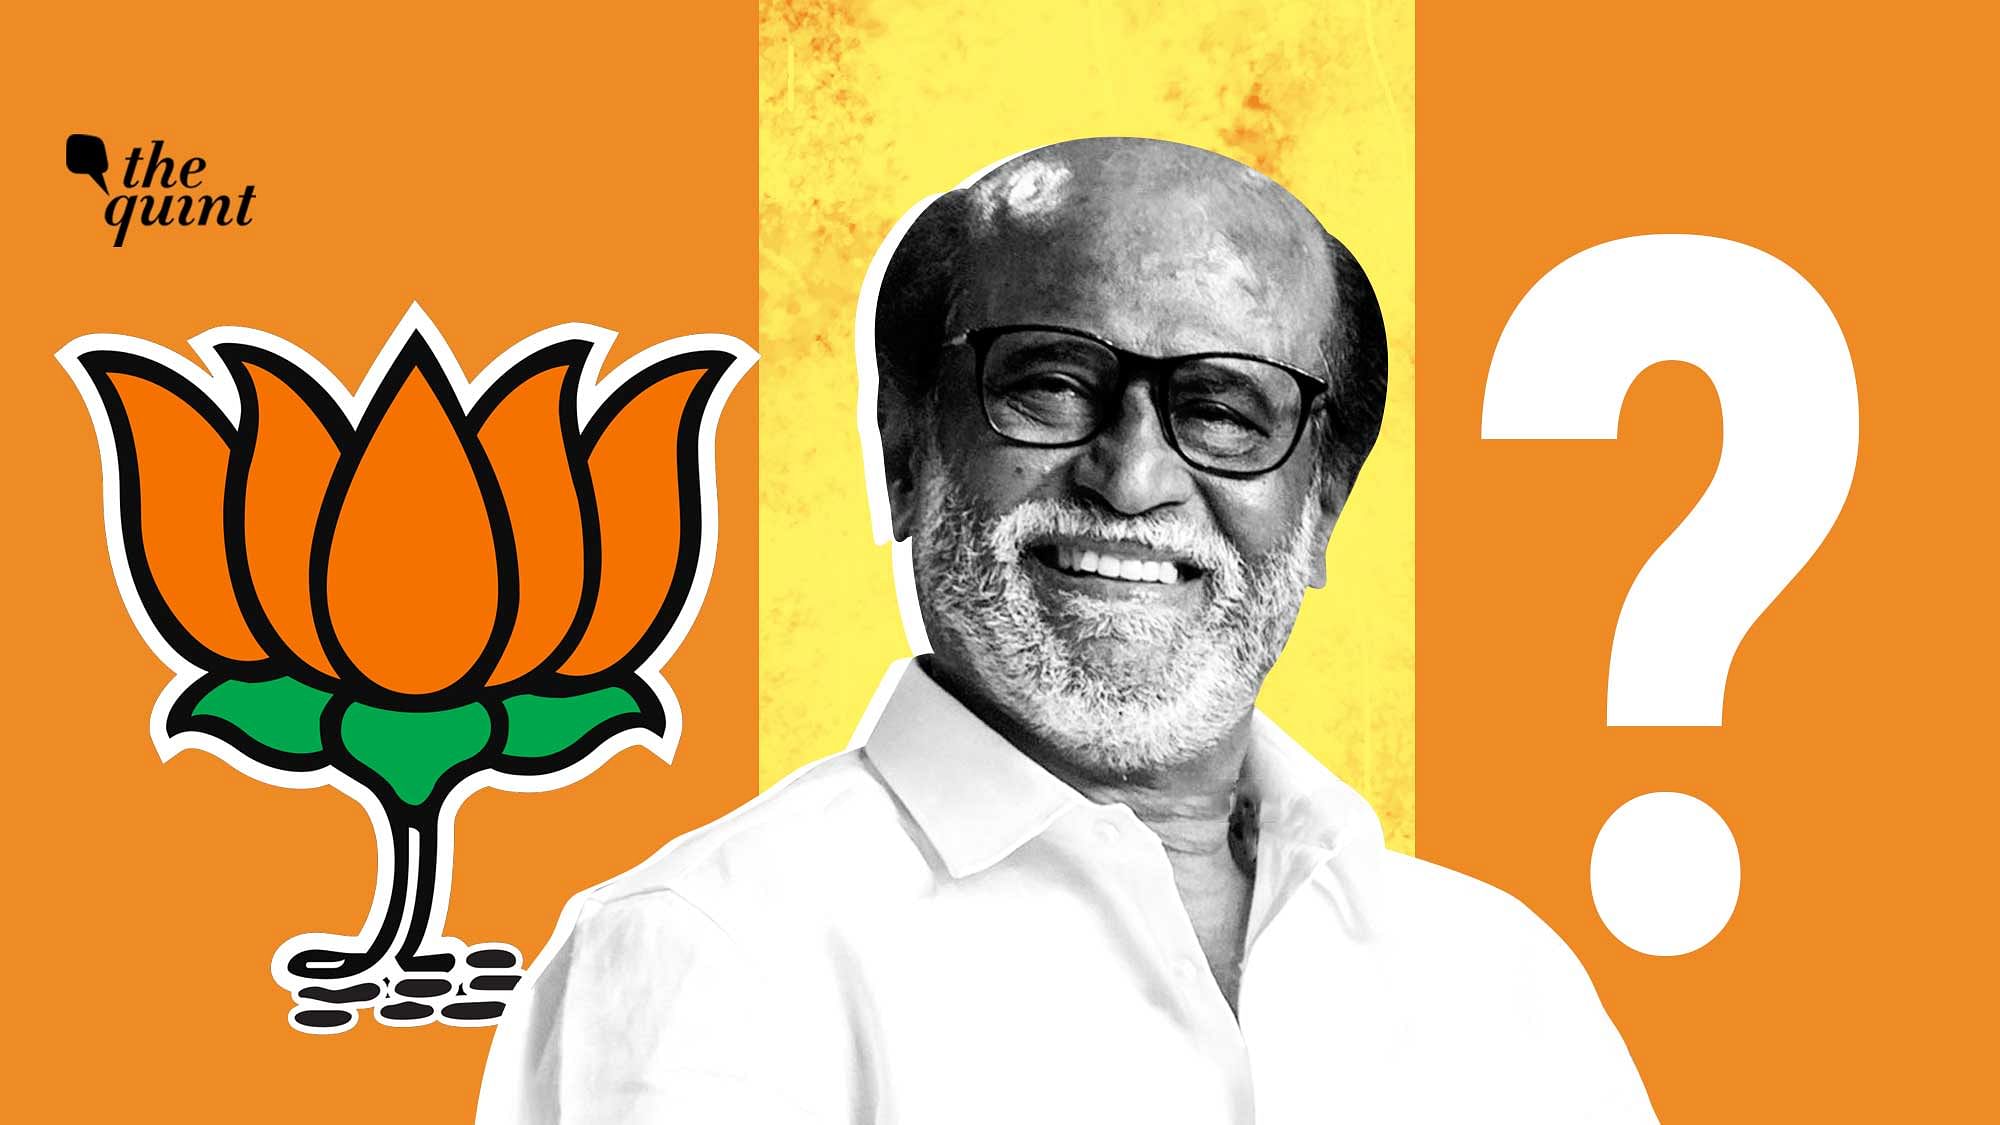 BJP might have succeeded in consolidating majority community in several states, but not in Tamil Nadu. So will Rajinikanth be the trump factor?